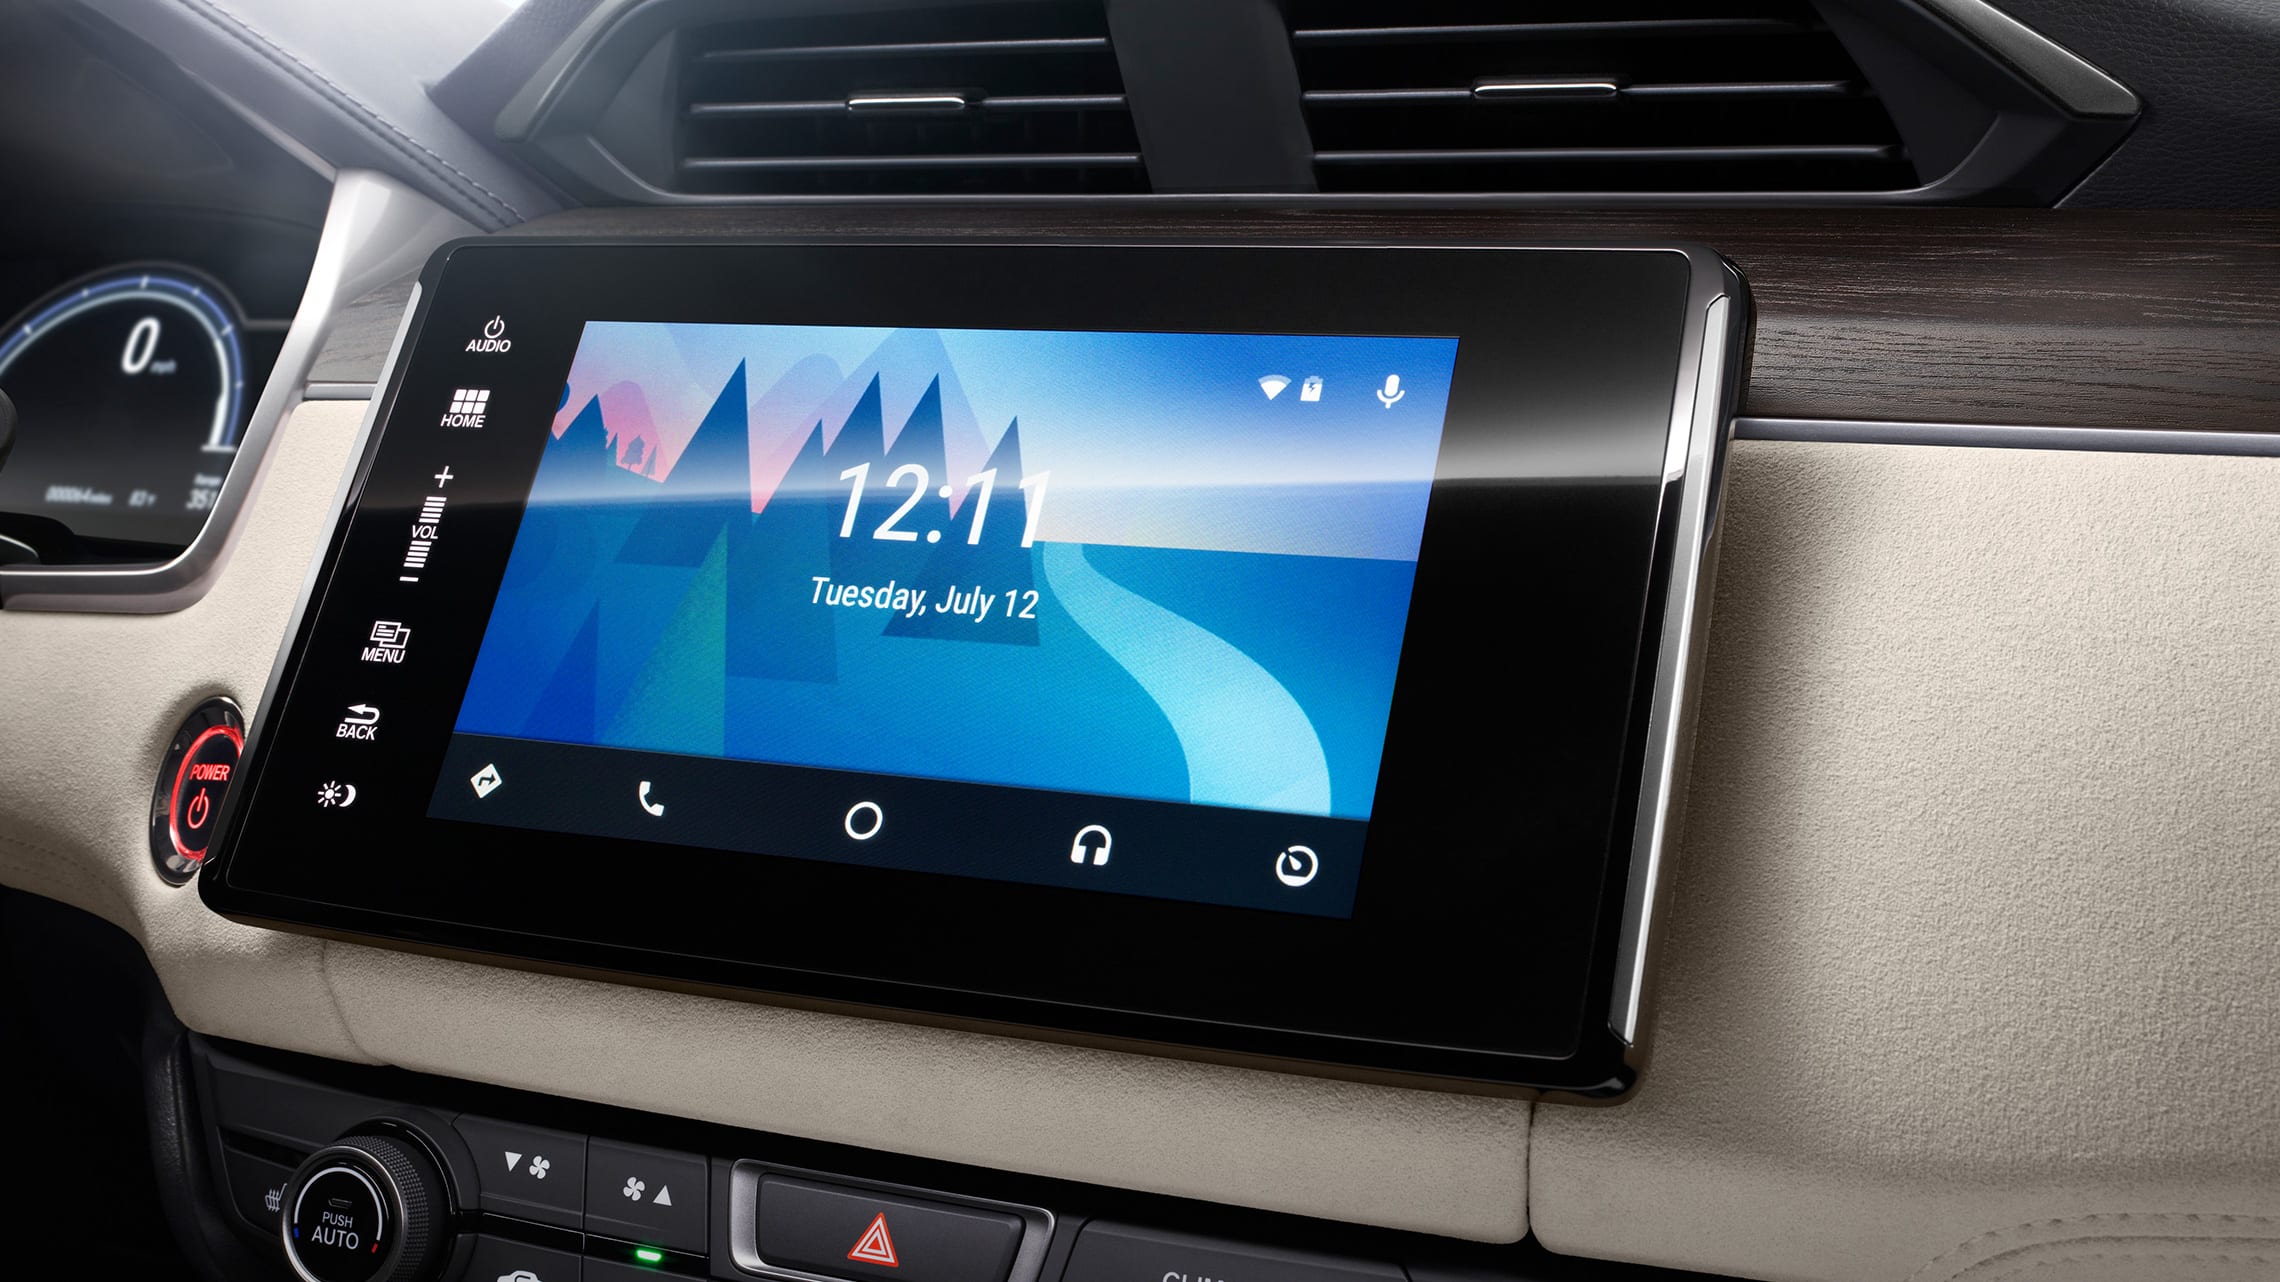 Android Auto™ integration on Display Audio touch-screen in the 2021 Honda Ridgeline.